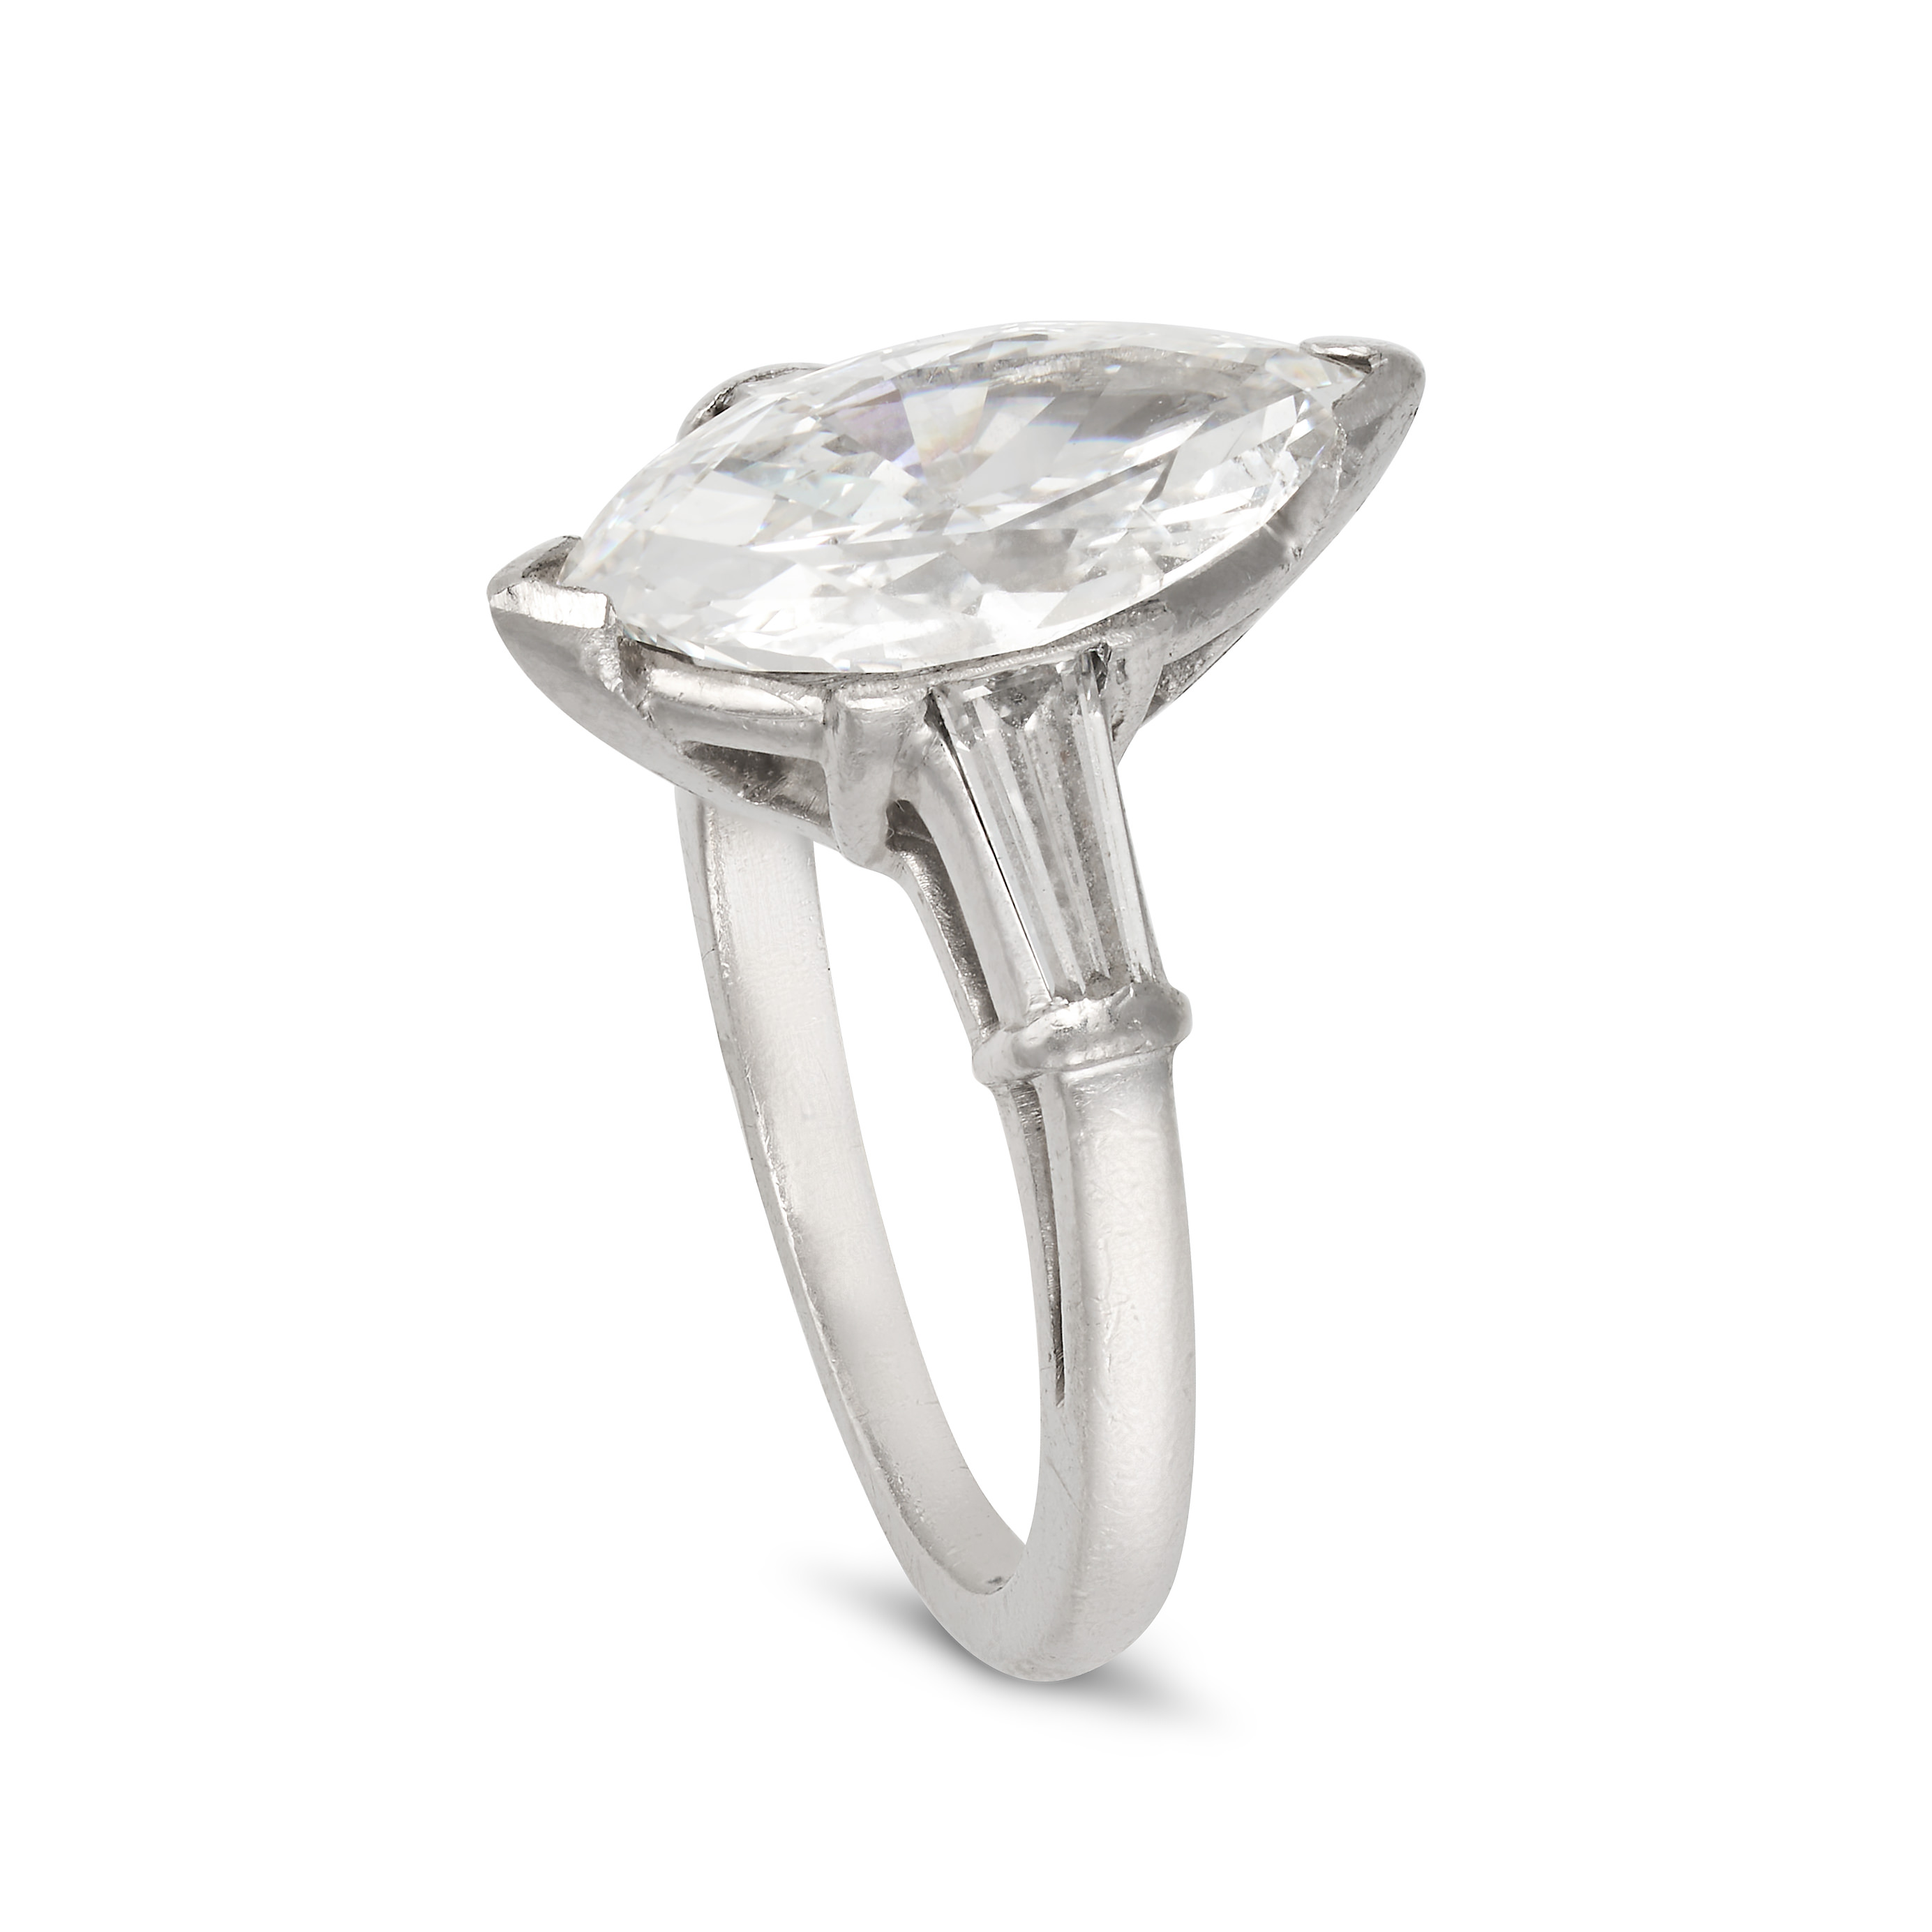 A 2.10 CARAT SOLITAIRE DIAMOND RING in platinum, set with a marquise cut diamond of 2.10 carats f... - Image 2 of 2